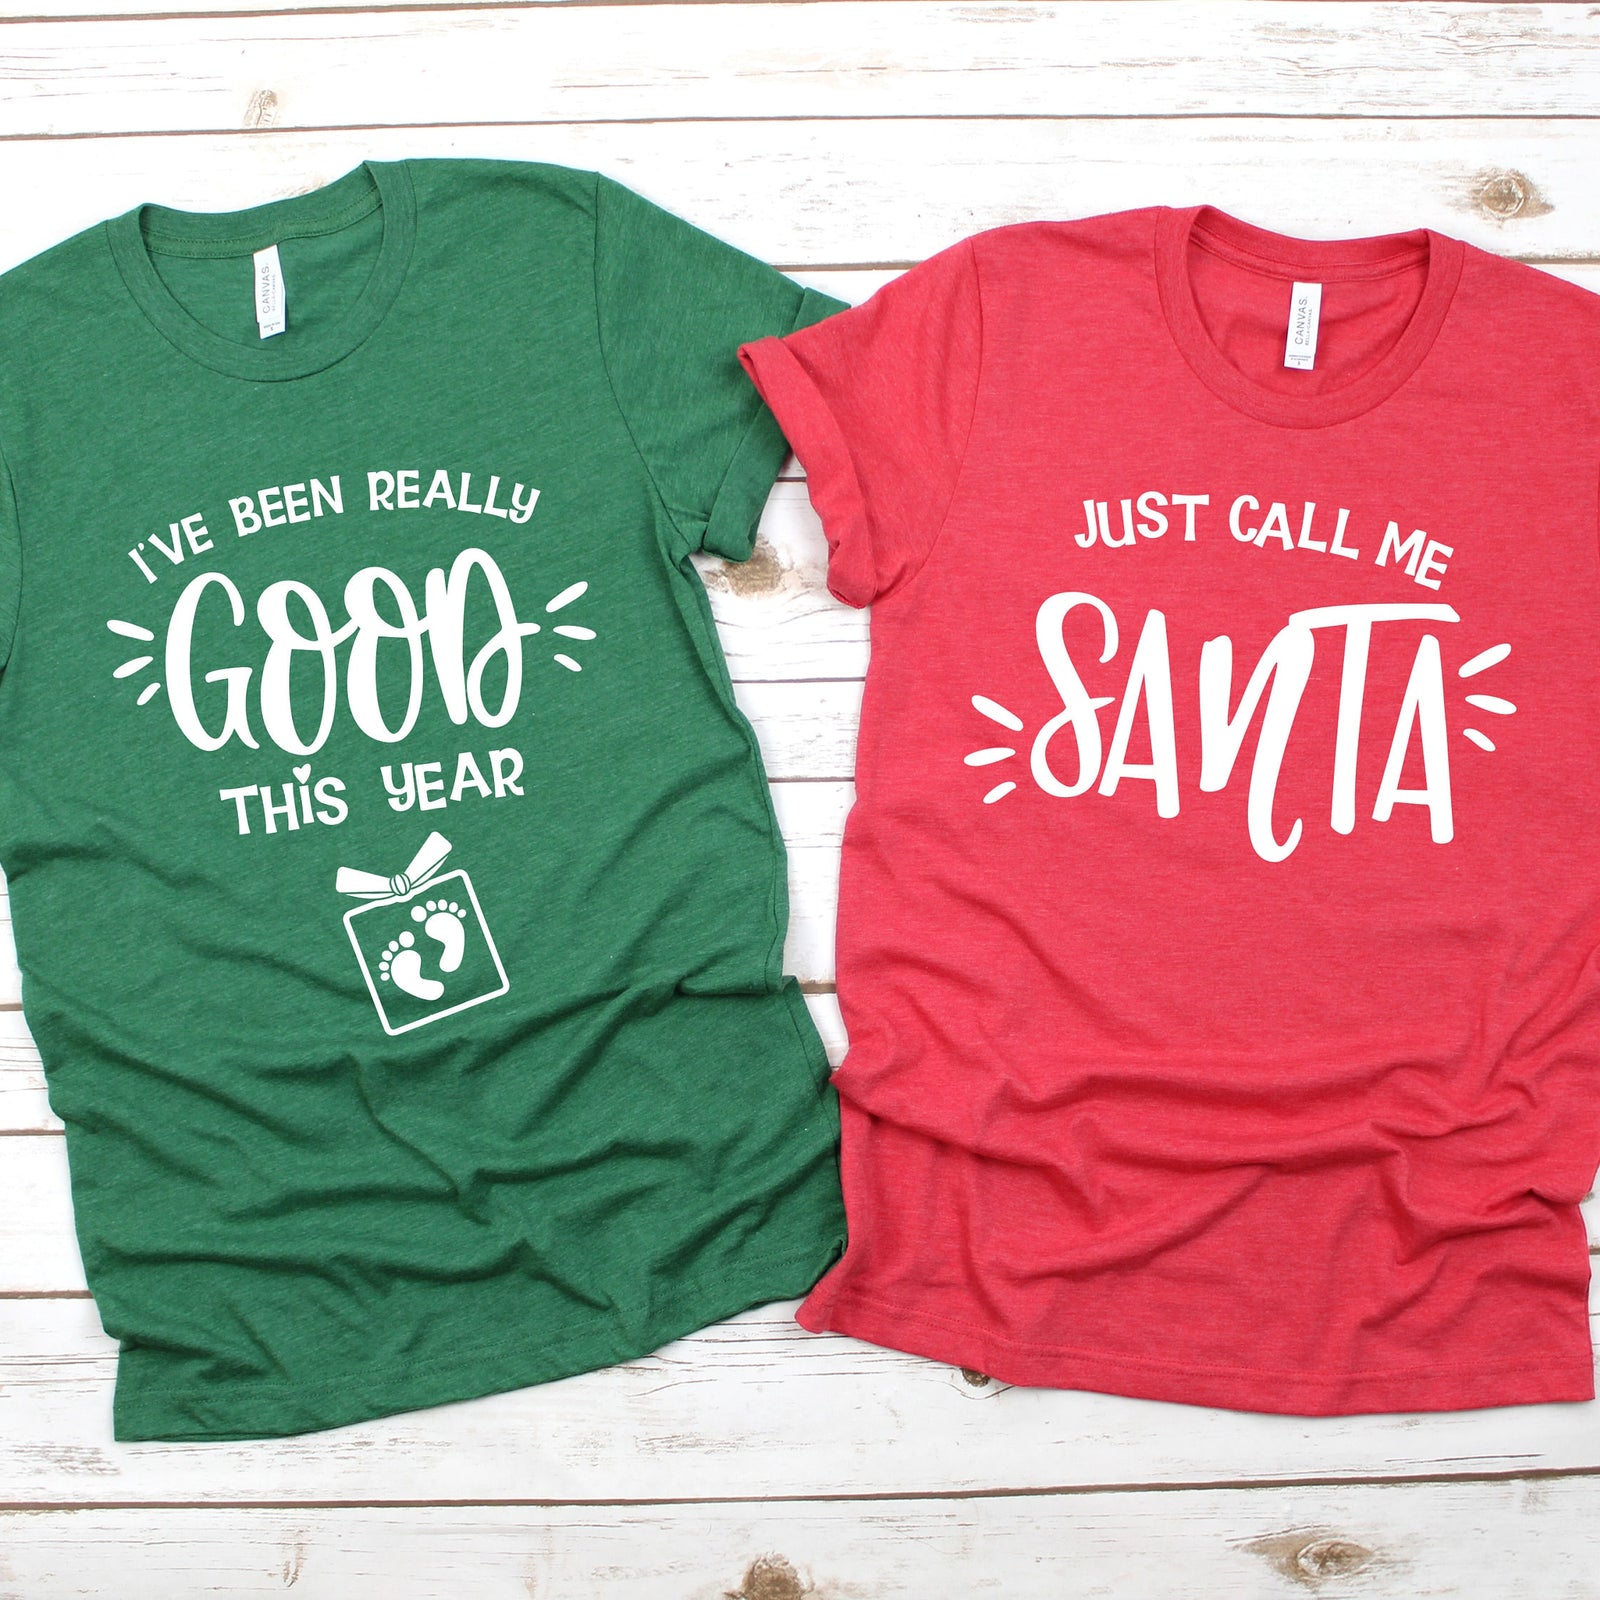 I've Been Really Good This Year - Just Call Me Santa - Funny Christmas Couple Shirts - Cute Pregnancy Baby Announcement - Holiday Humor Tee